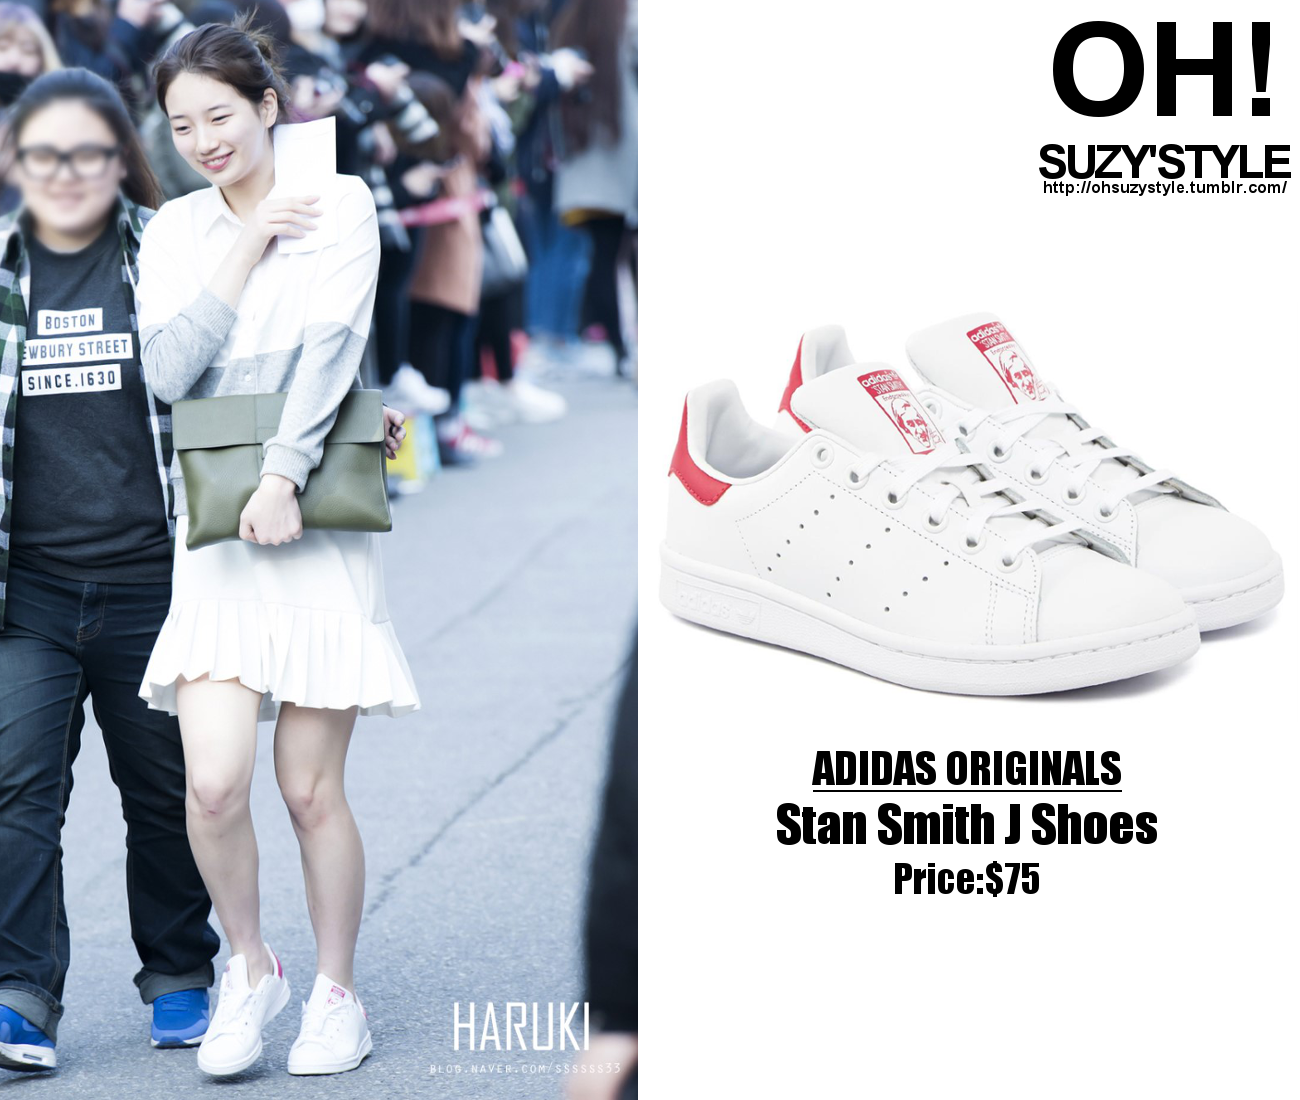 Bae Suzy Style on Twitter: "[#SUZYSTYLE] Stan Smith J Shoes (White&amp;Pink) Price:$75 Brand:Adidas &lt;150410 On The Way to Music Bank&gt; #fashion http://t.co/N9xwhmm2bv" / Twitter